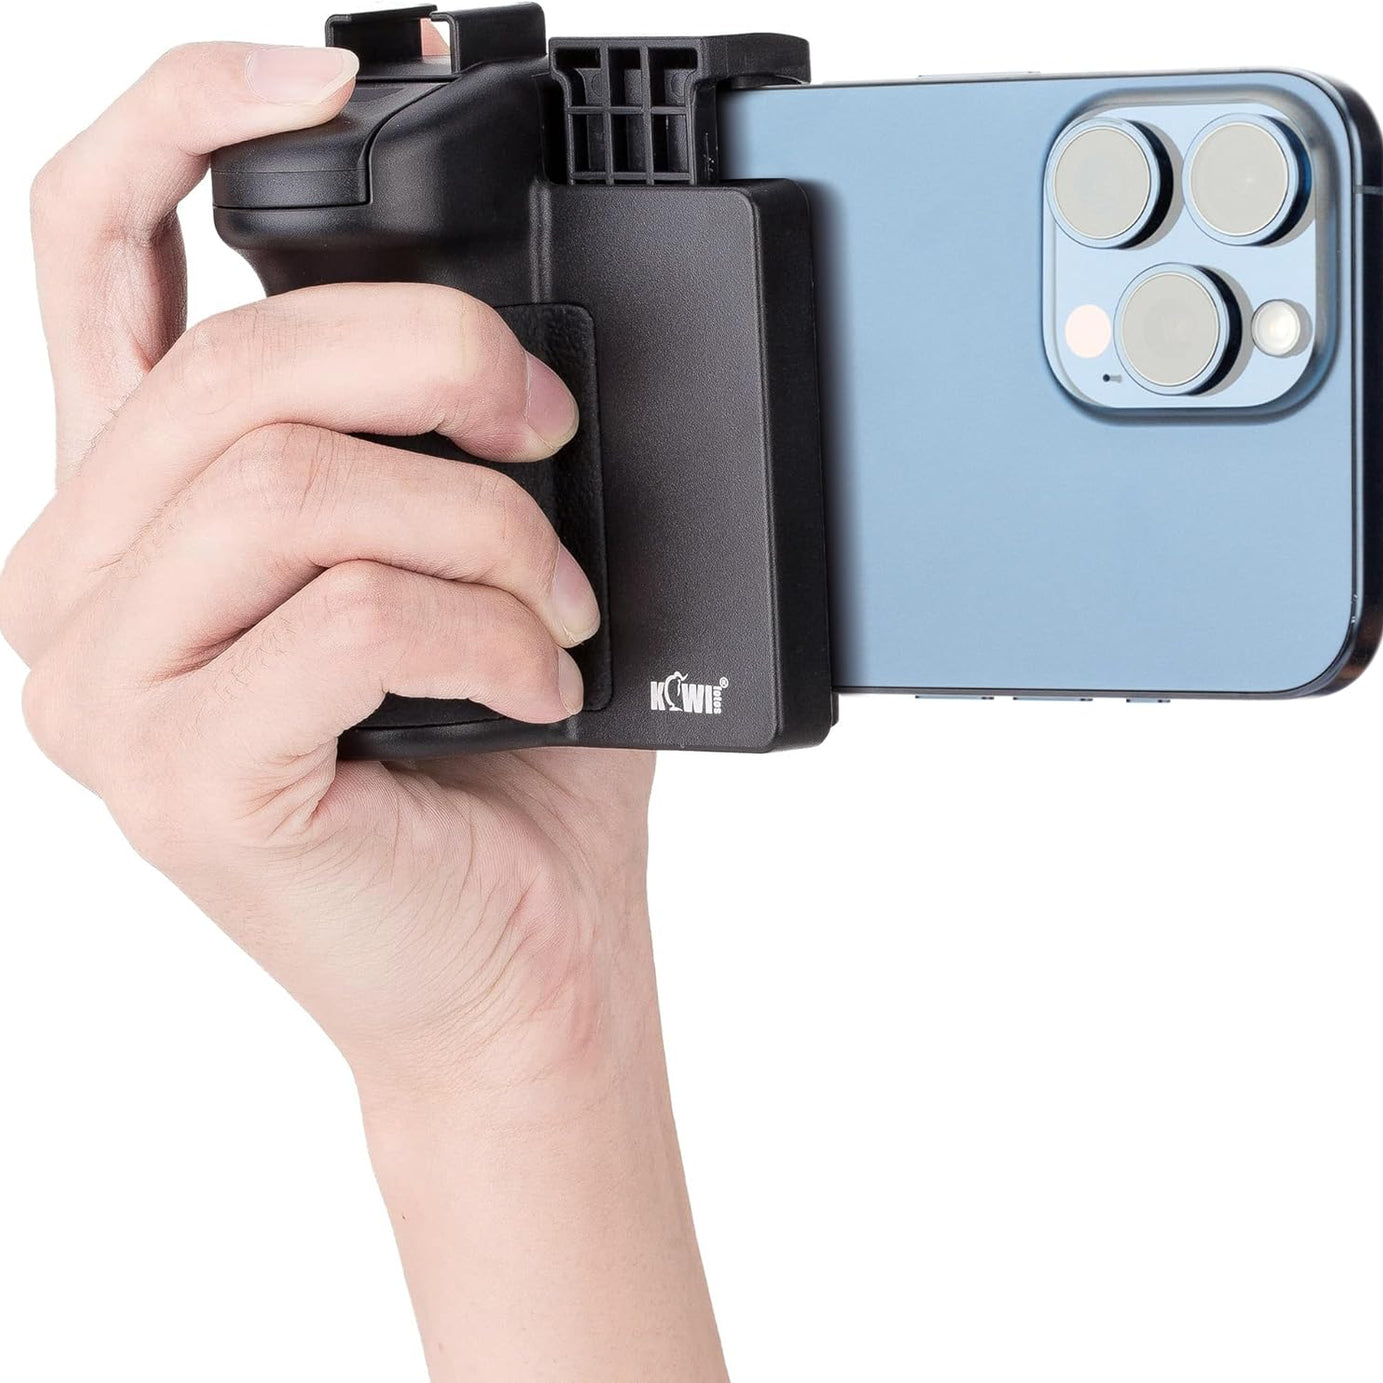 t, Phone Camera Grip Handle Holder with Detachable Bluetooth Shutter and Cold Shoe Adapter.